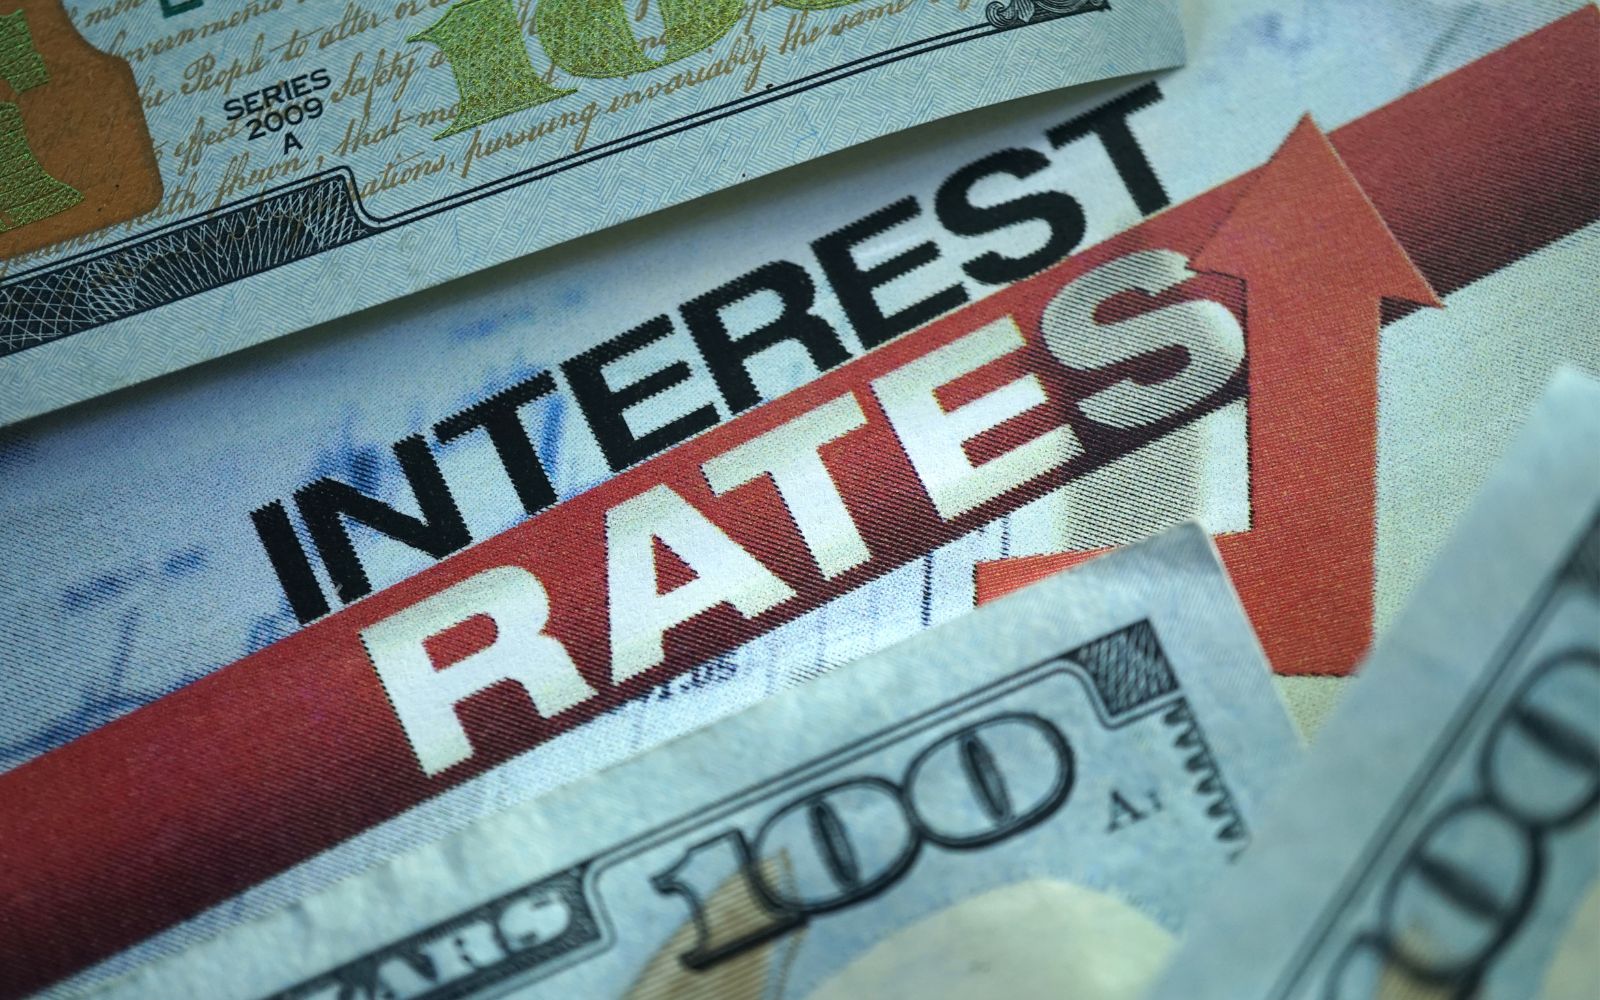 long term care insurance agents know about interest rates